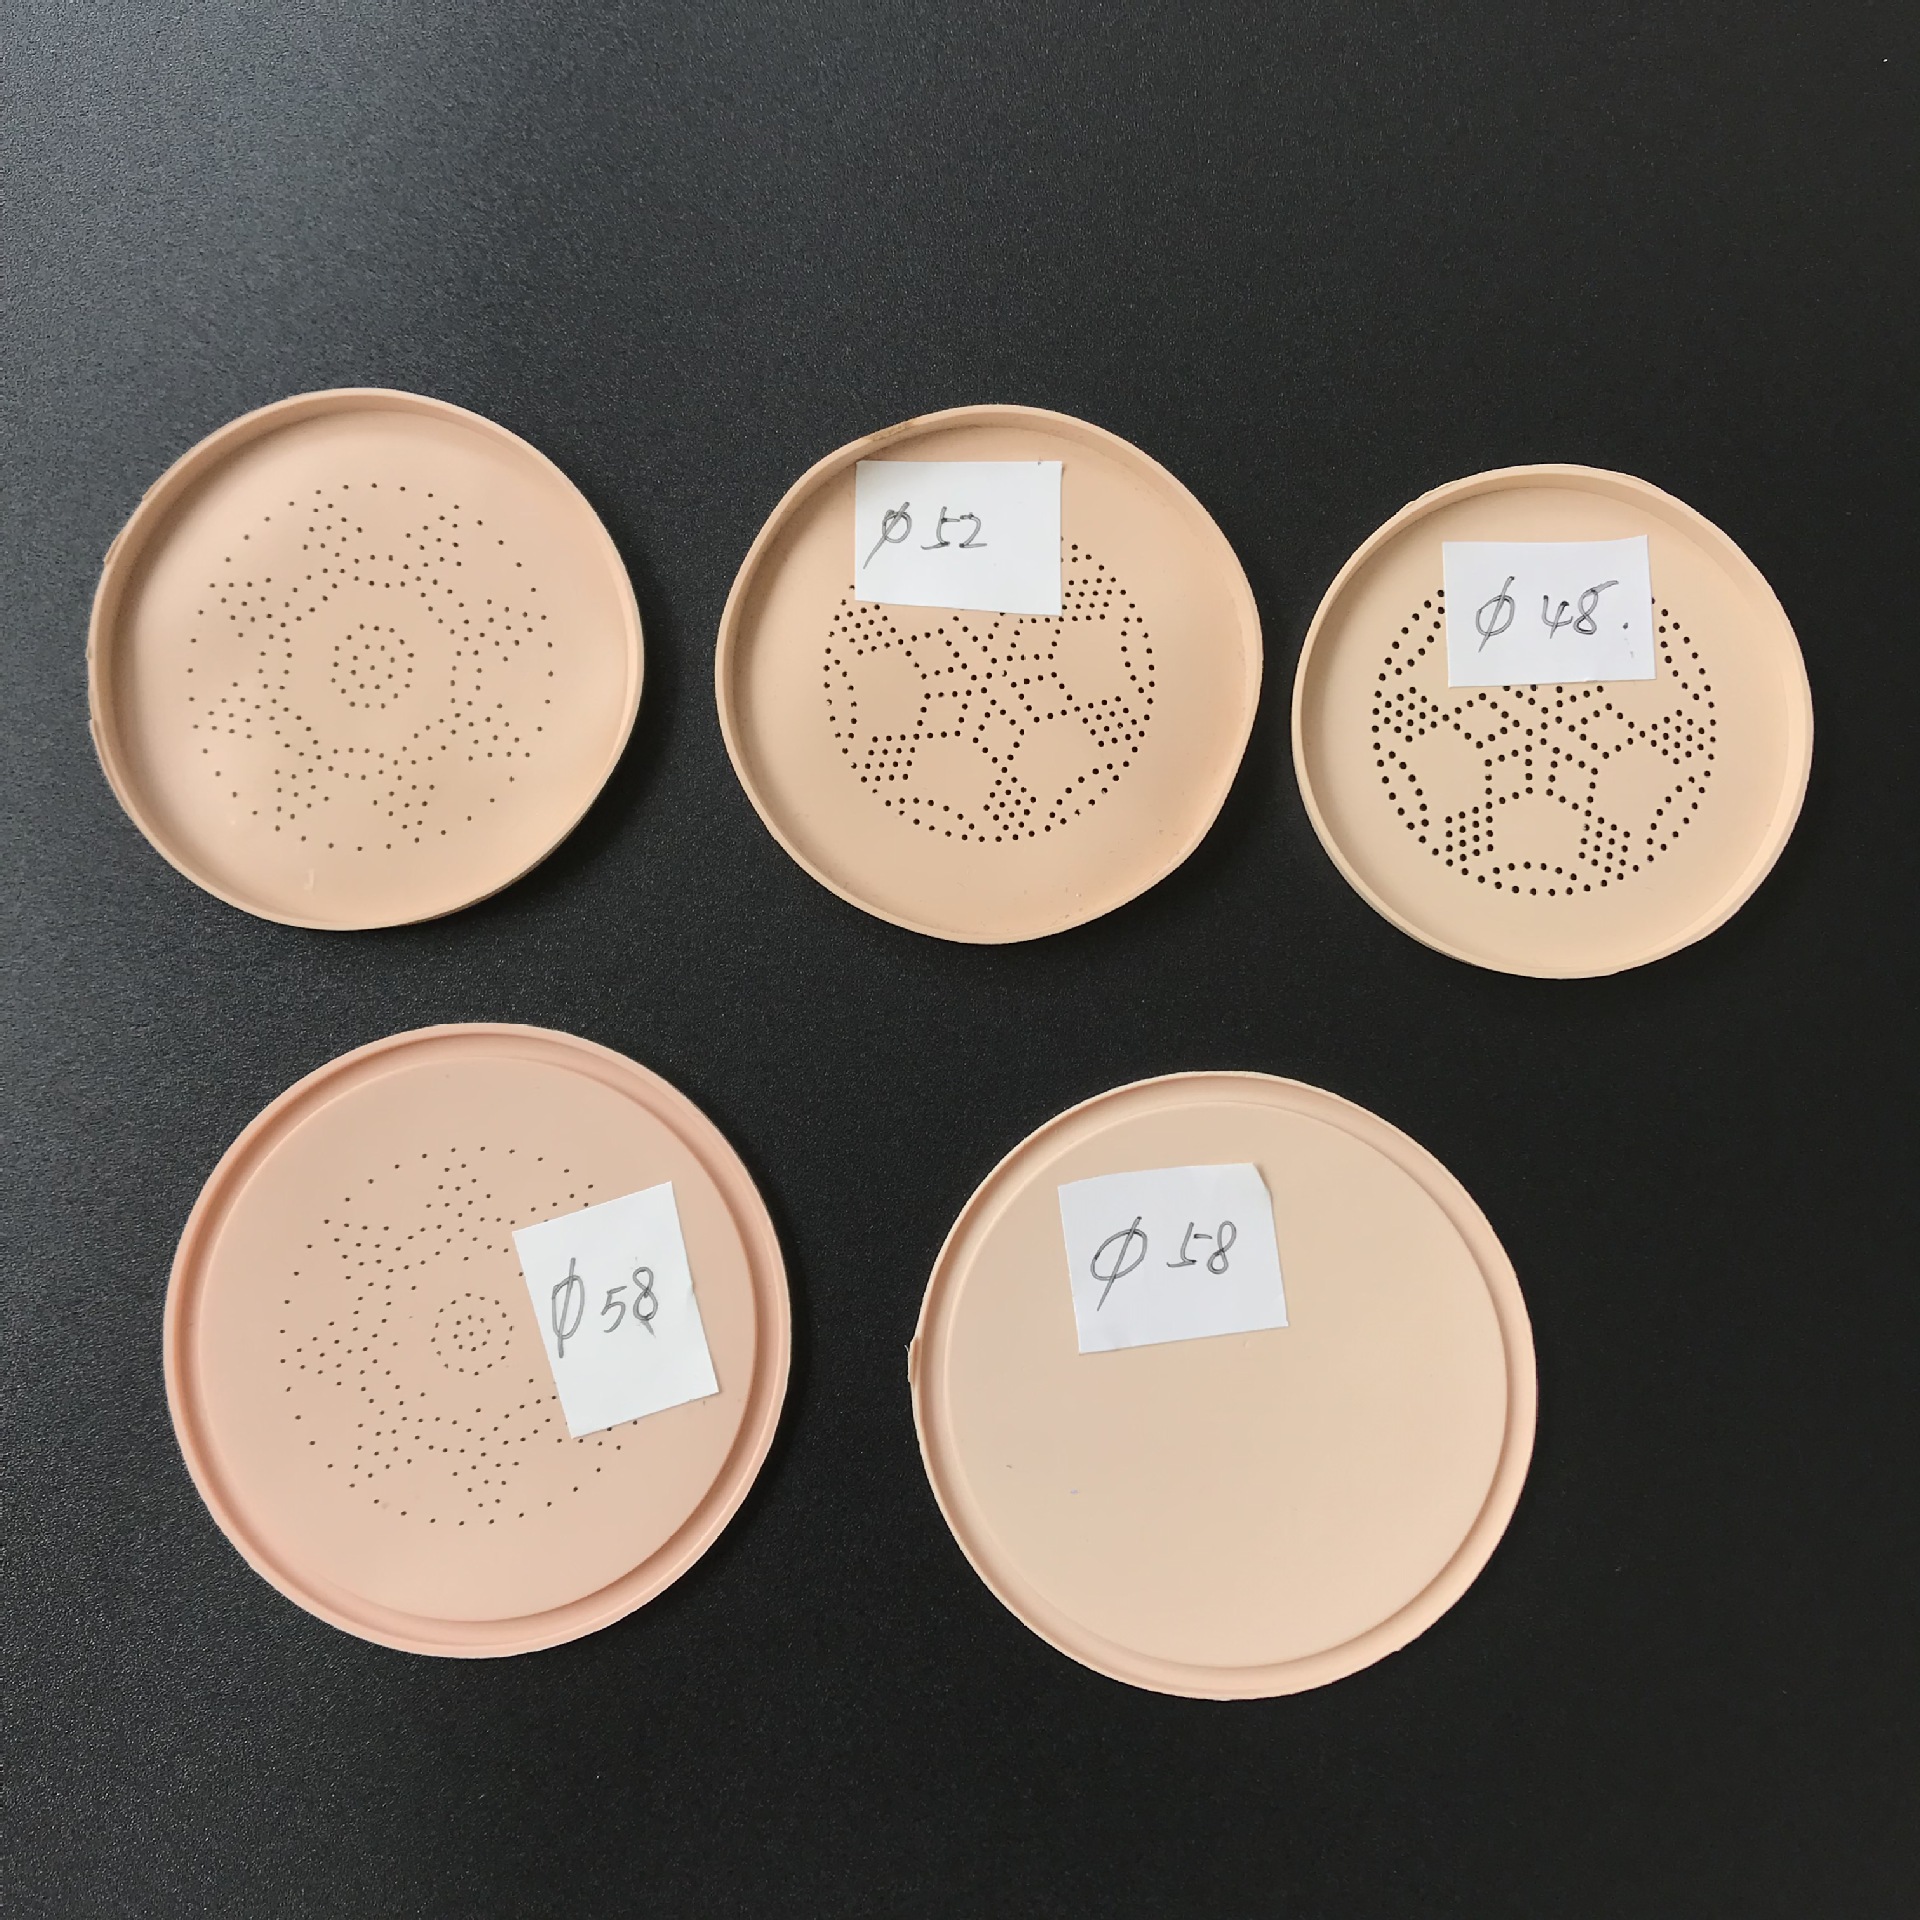 Silicone Products Factory Cosmetics Packaging Air Cushion BB Box Silica Gel Filter Screen Mushroom-Shaped Haircut Seal Silicone Gasket Spot